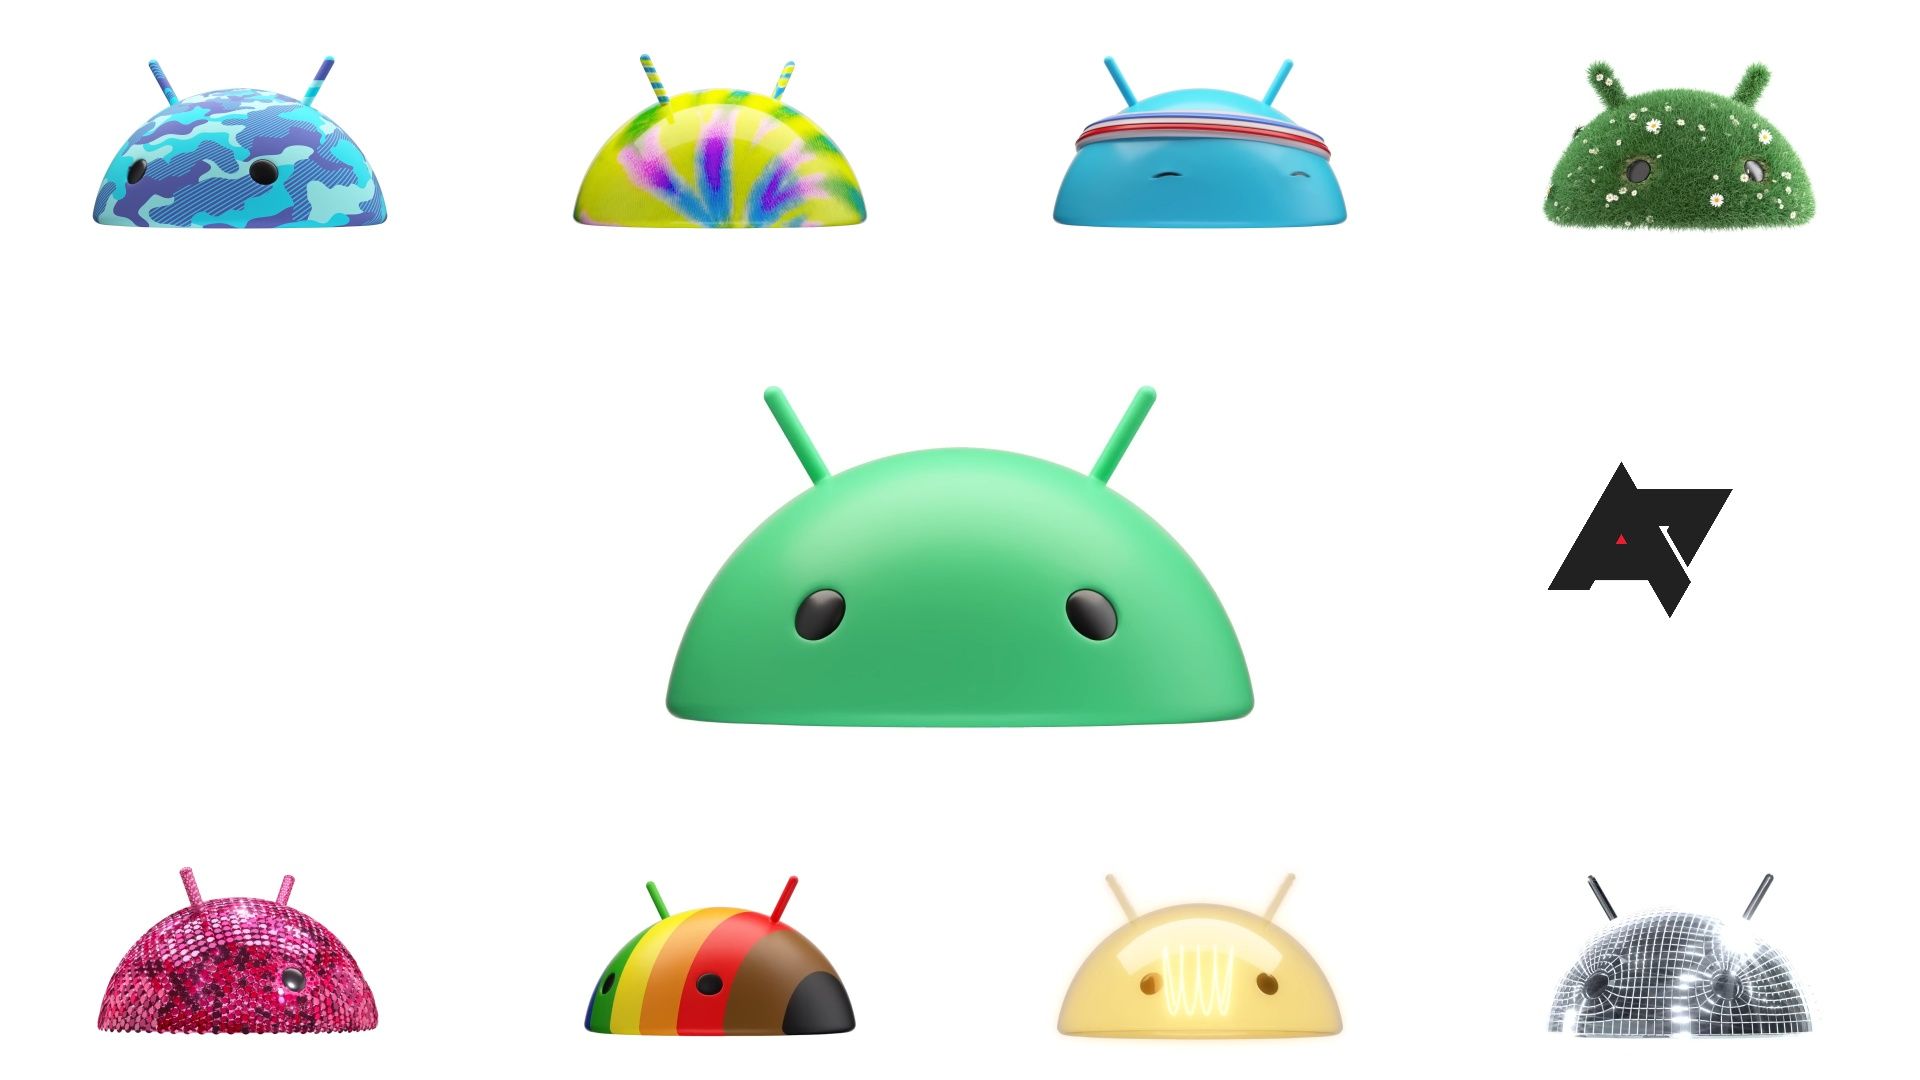 The Android bugdroid logo in a variety of different designs